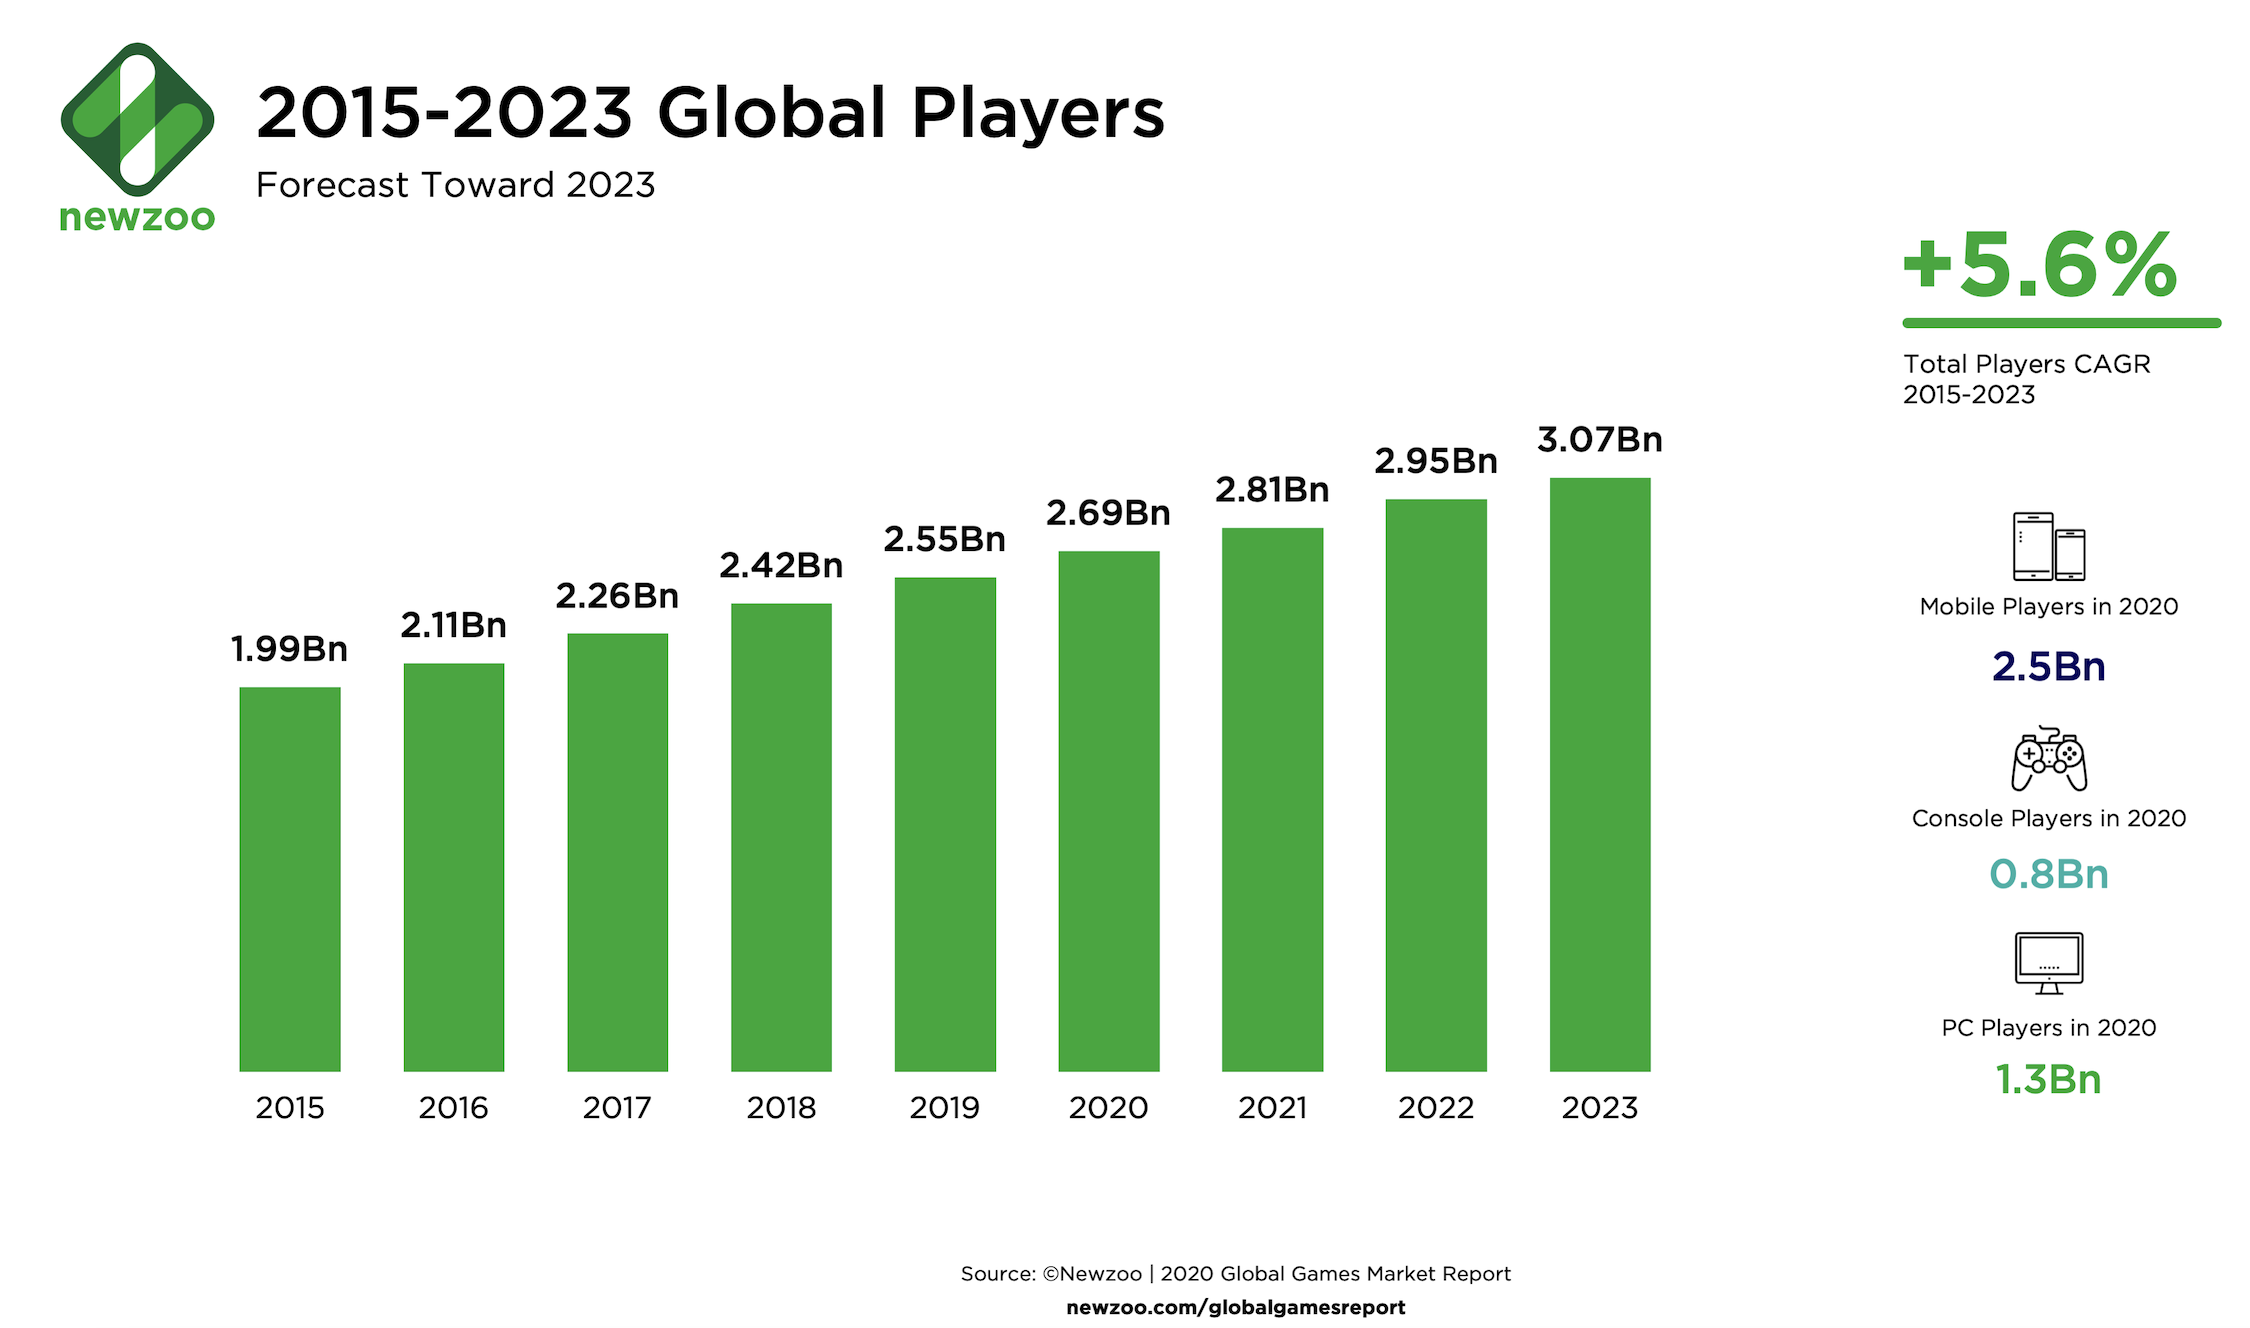 Chart: Mobile and Console Games Dominate Video Game Market